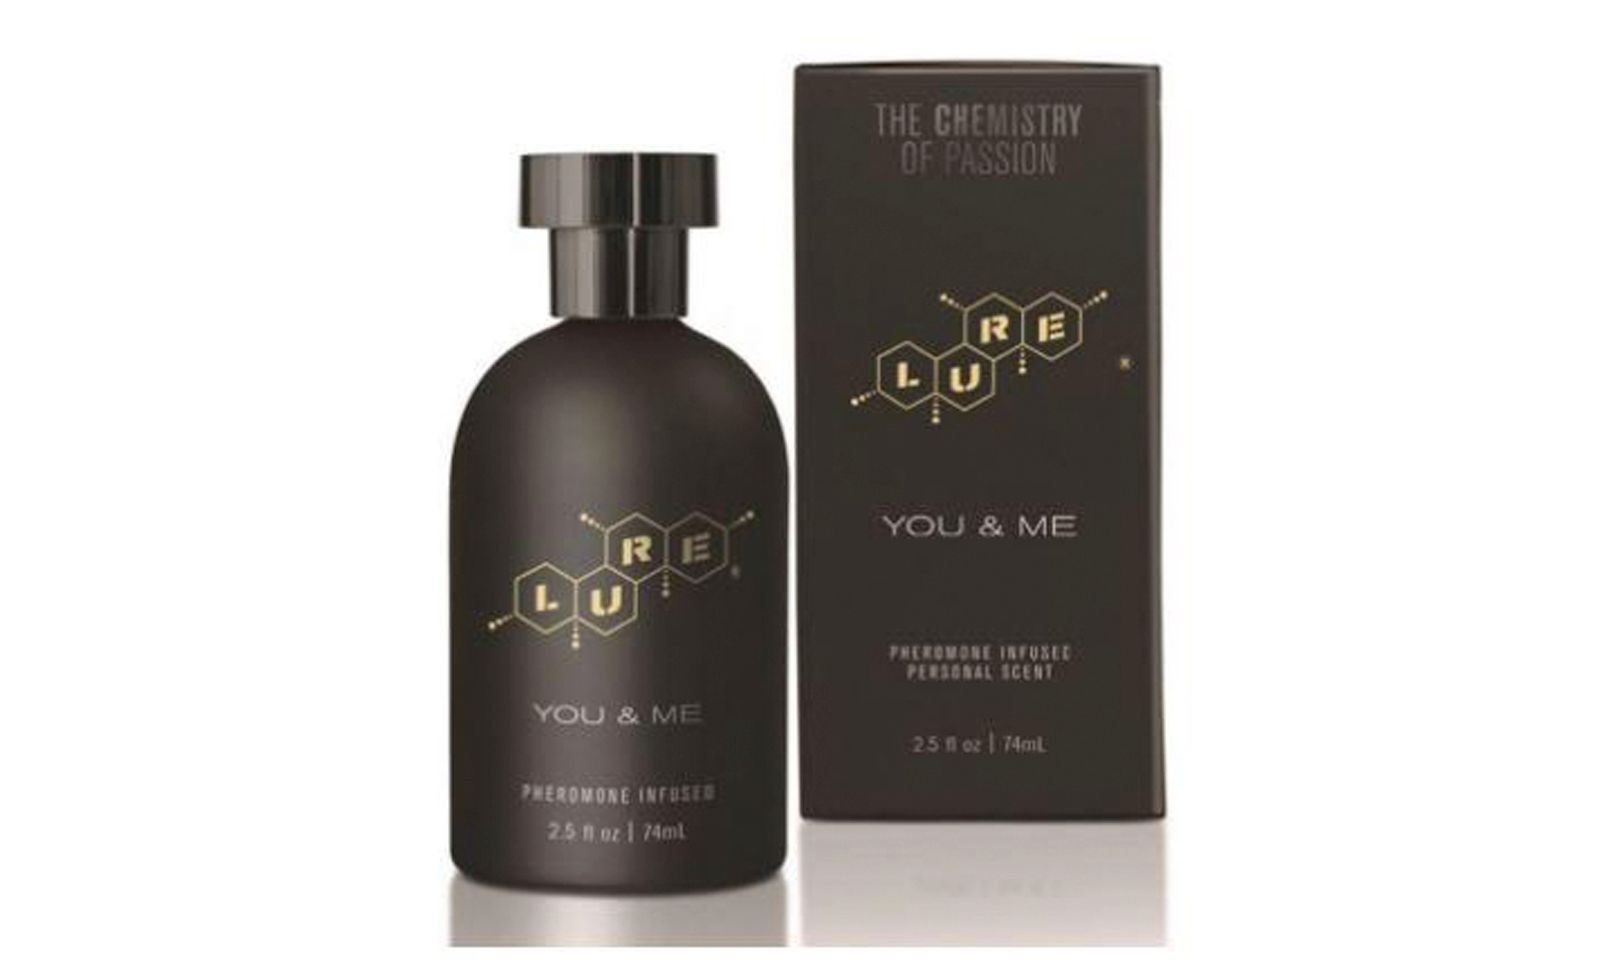 Lure Black Label Pheromone Infused Fragrances Shipping From Topco Sales Avn